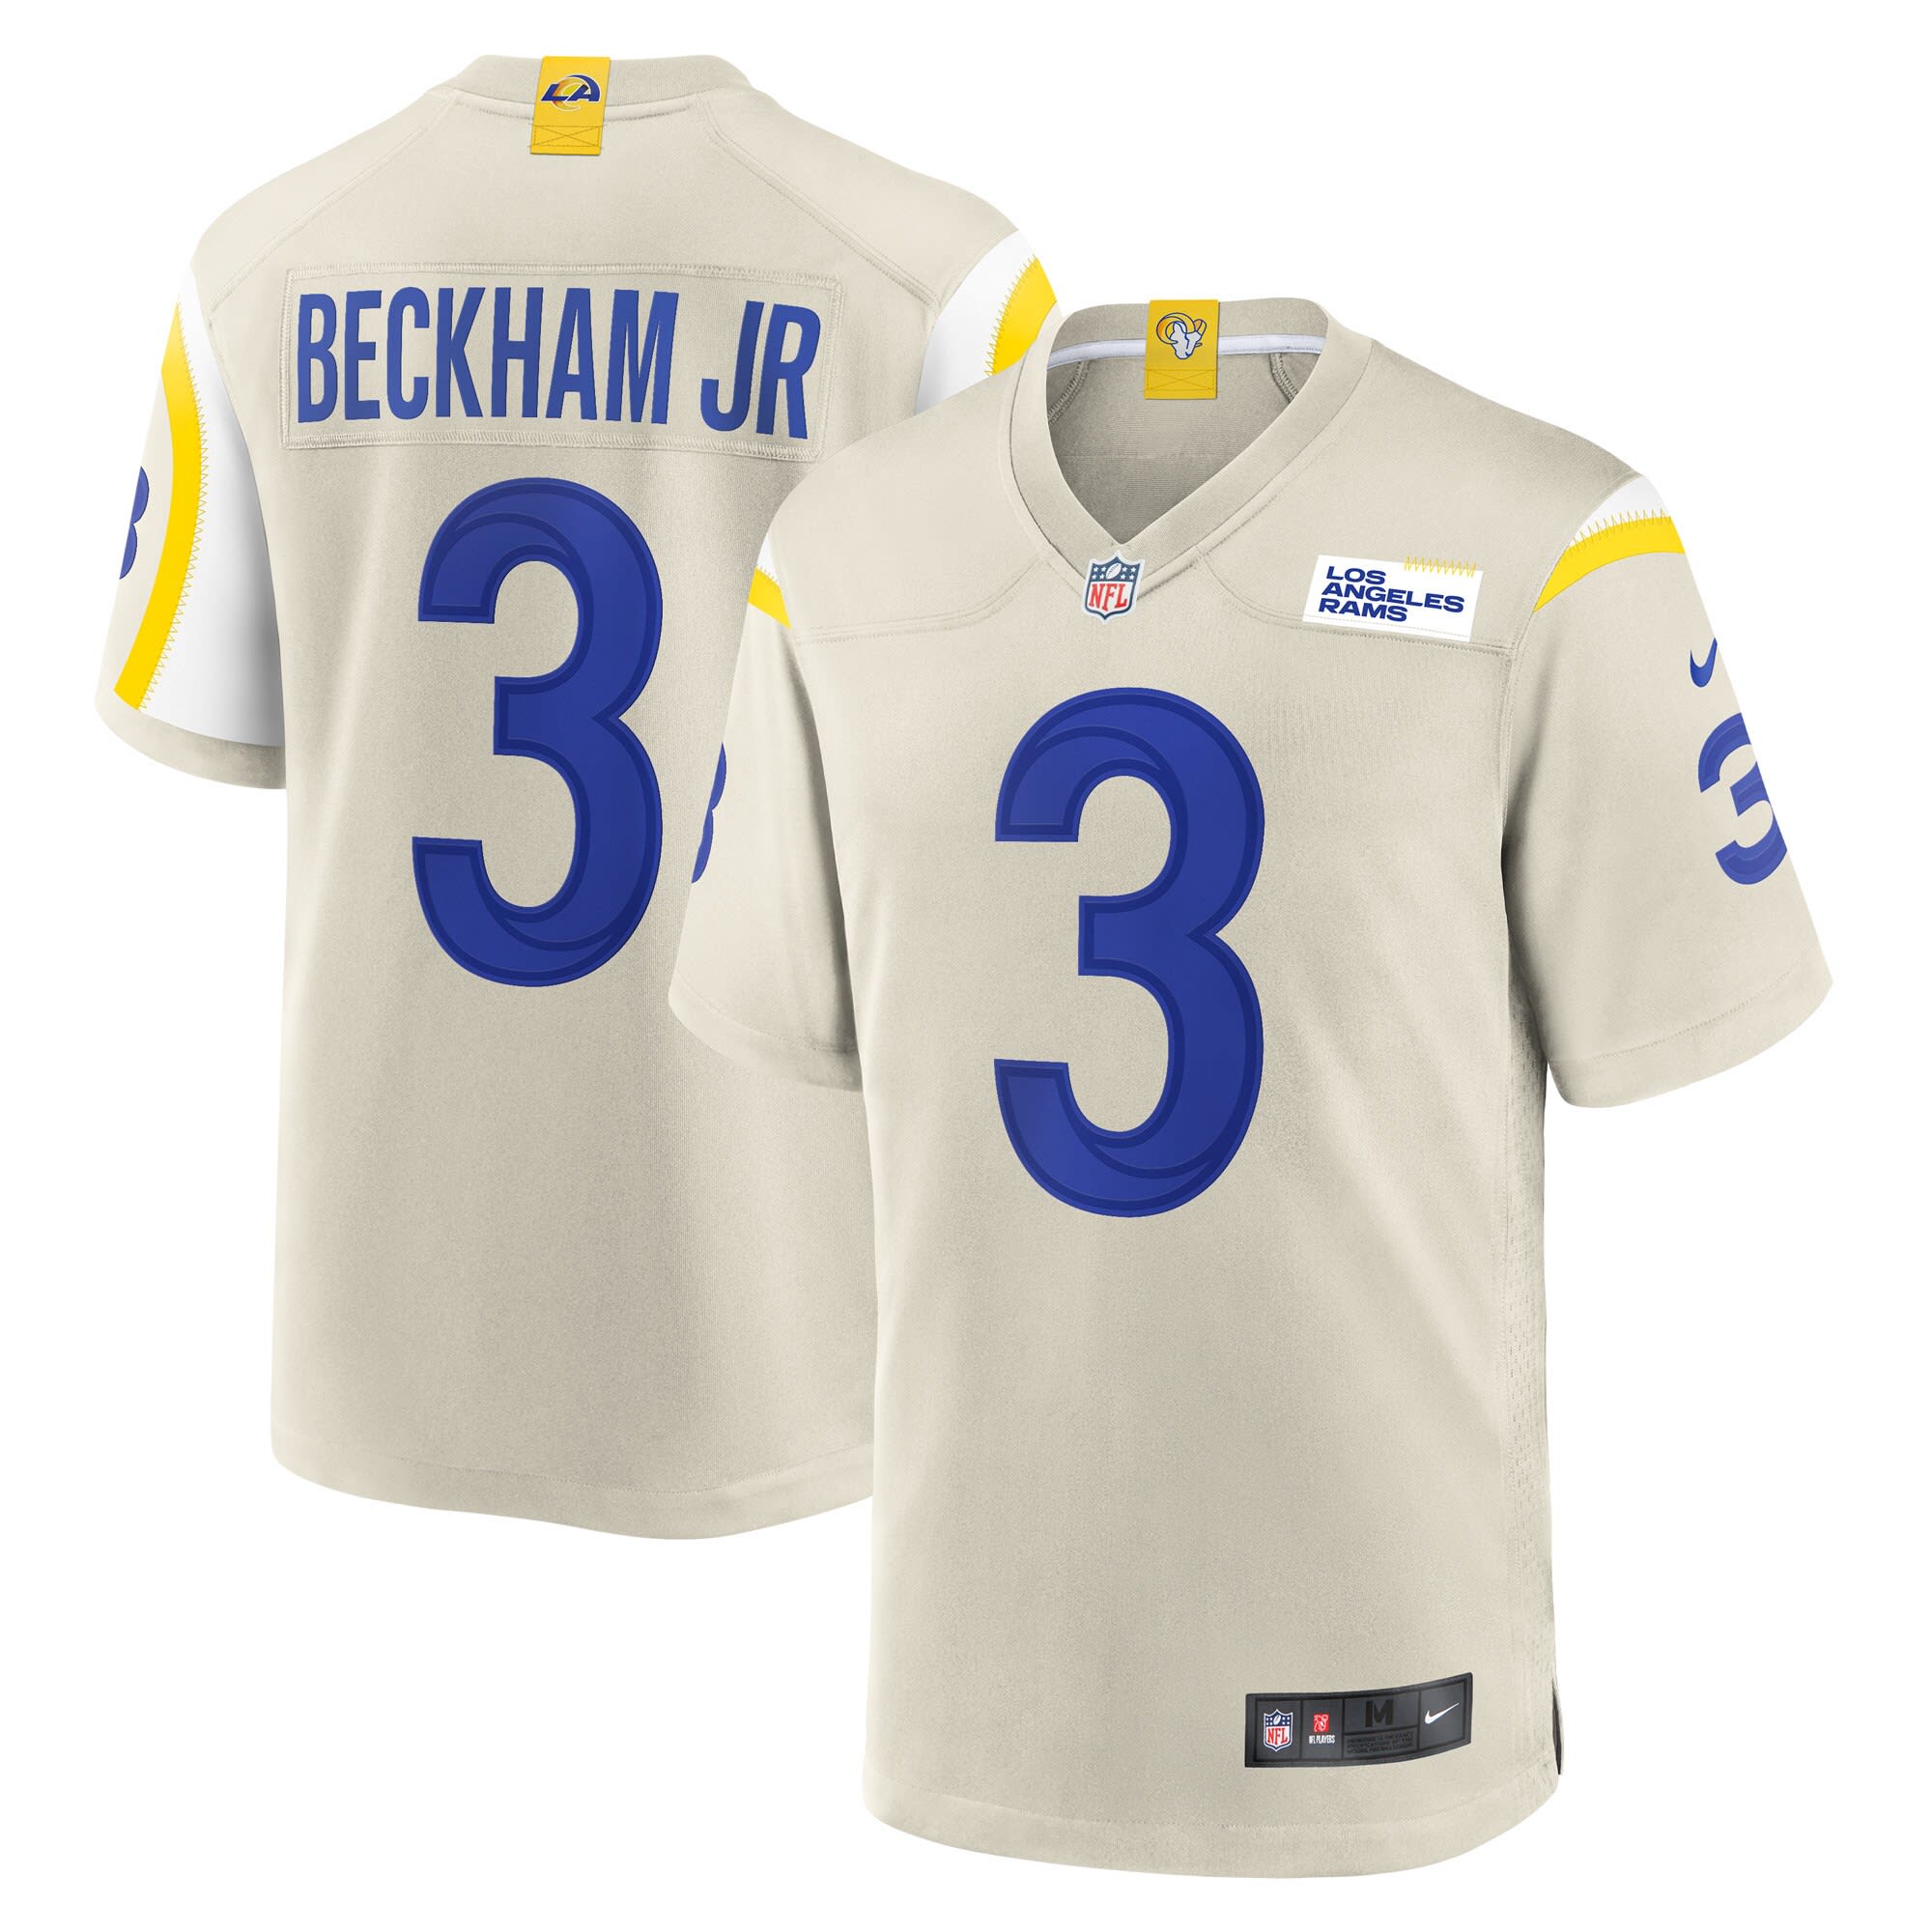 Order your Odell Beckham Jr. jersey today